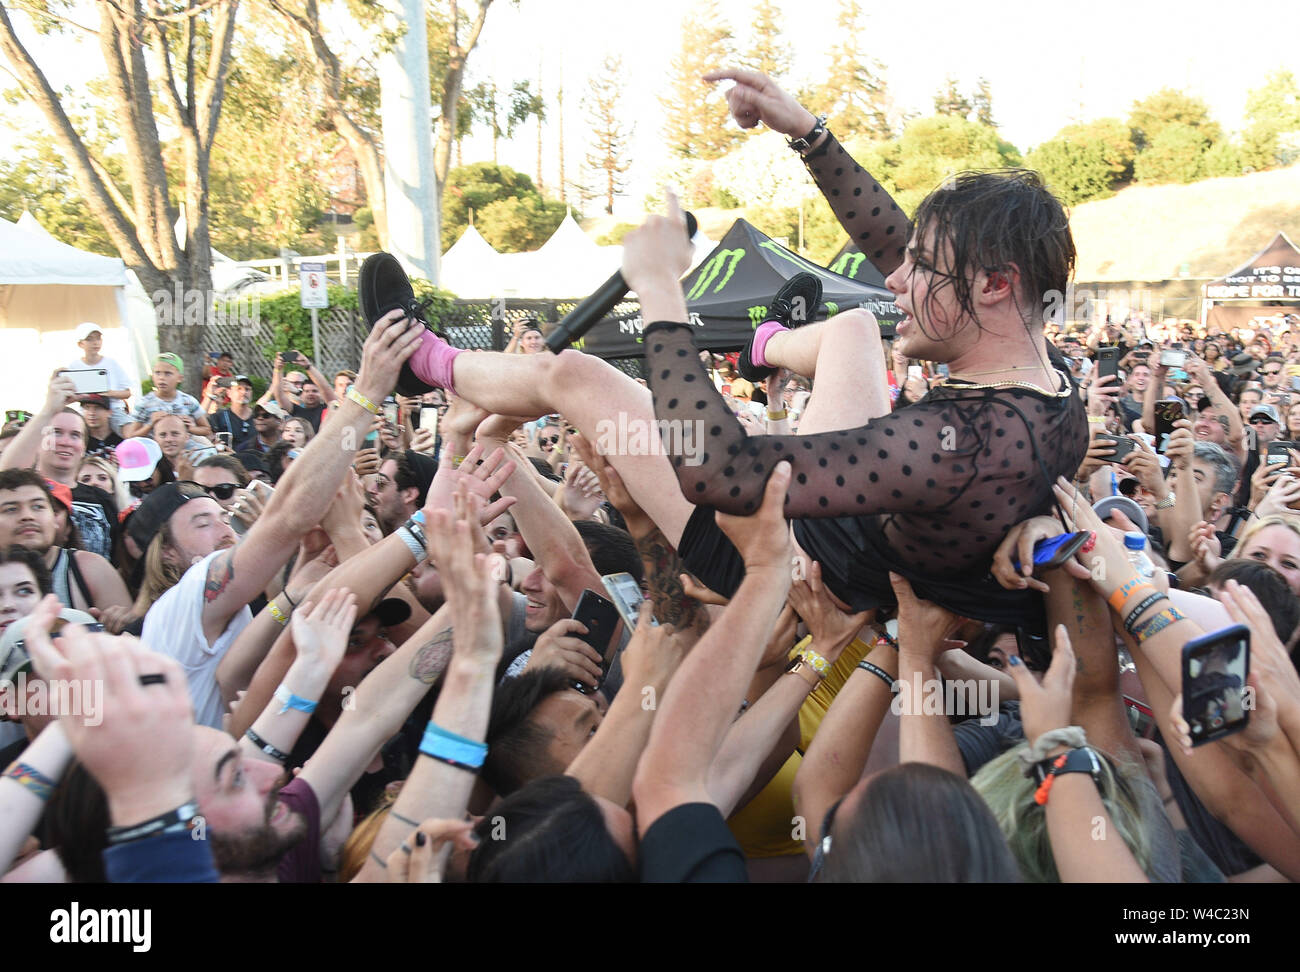 California, USA. 21st July, 2019. YUNGBLUD performs in the crowd during the  Vans Warped Tour 25th Anniversary on July 21, 2019 in Mountain View,  California. Credit: MediaPunch Inc/Alamy Live News Stock Photo - Alamy